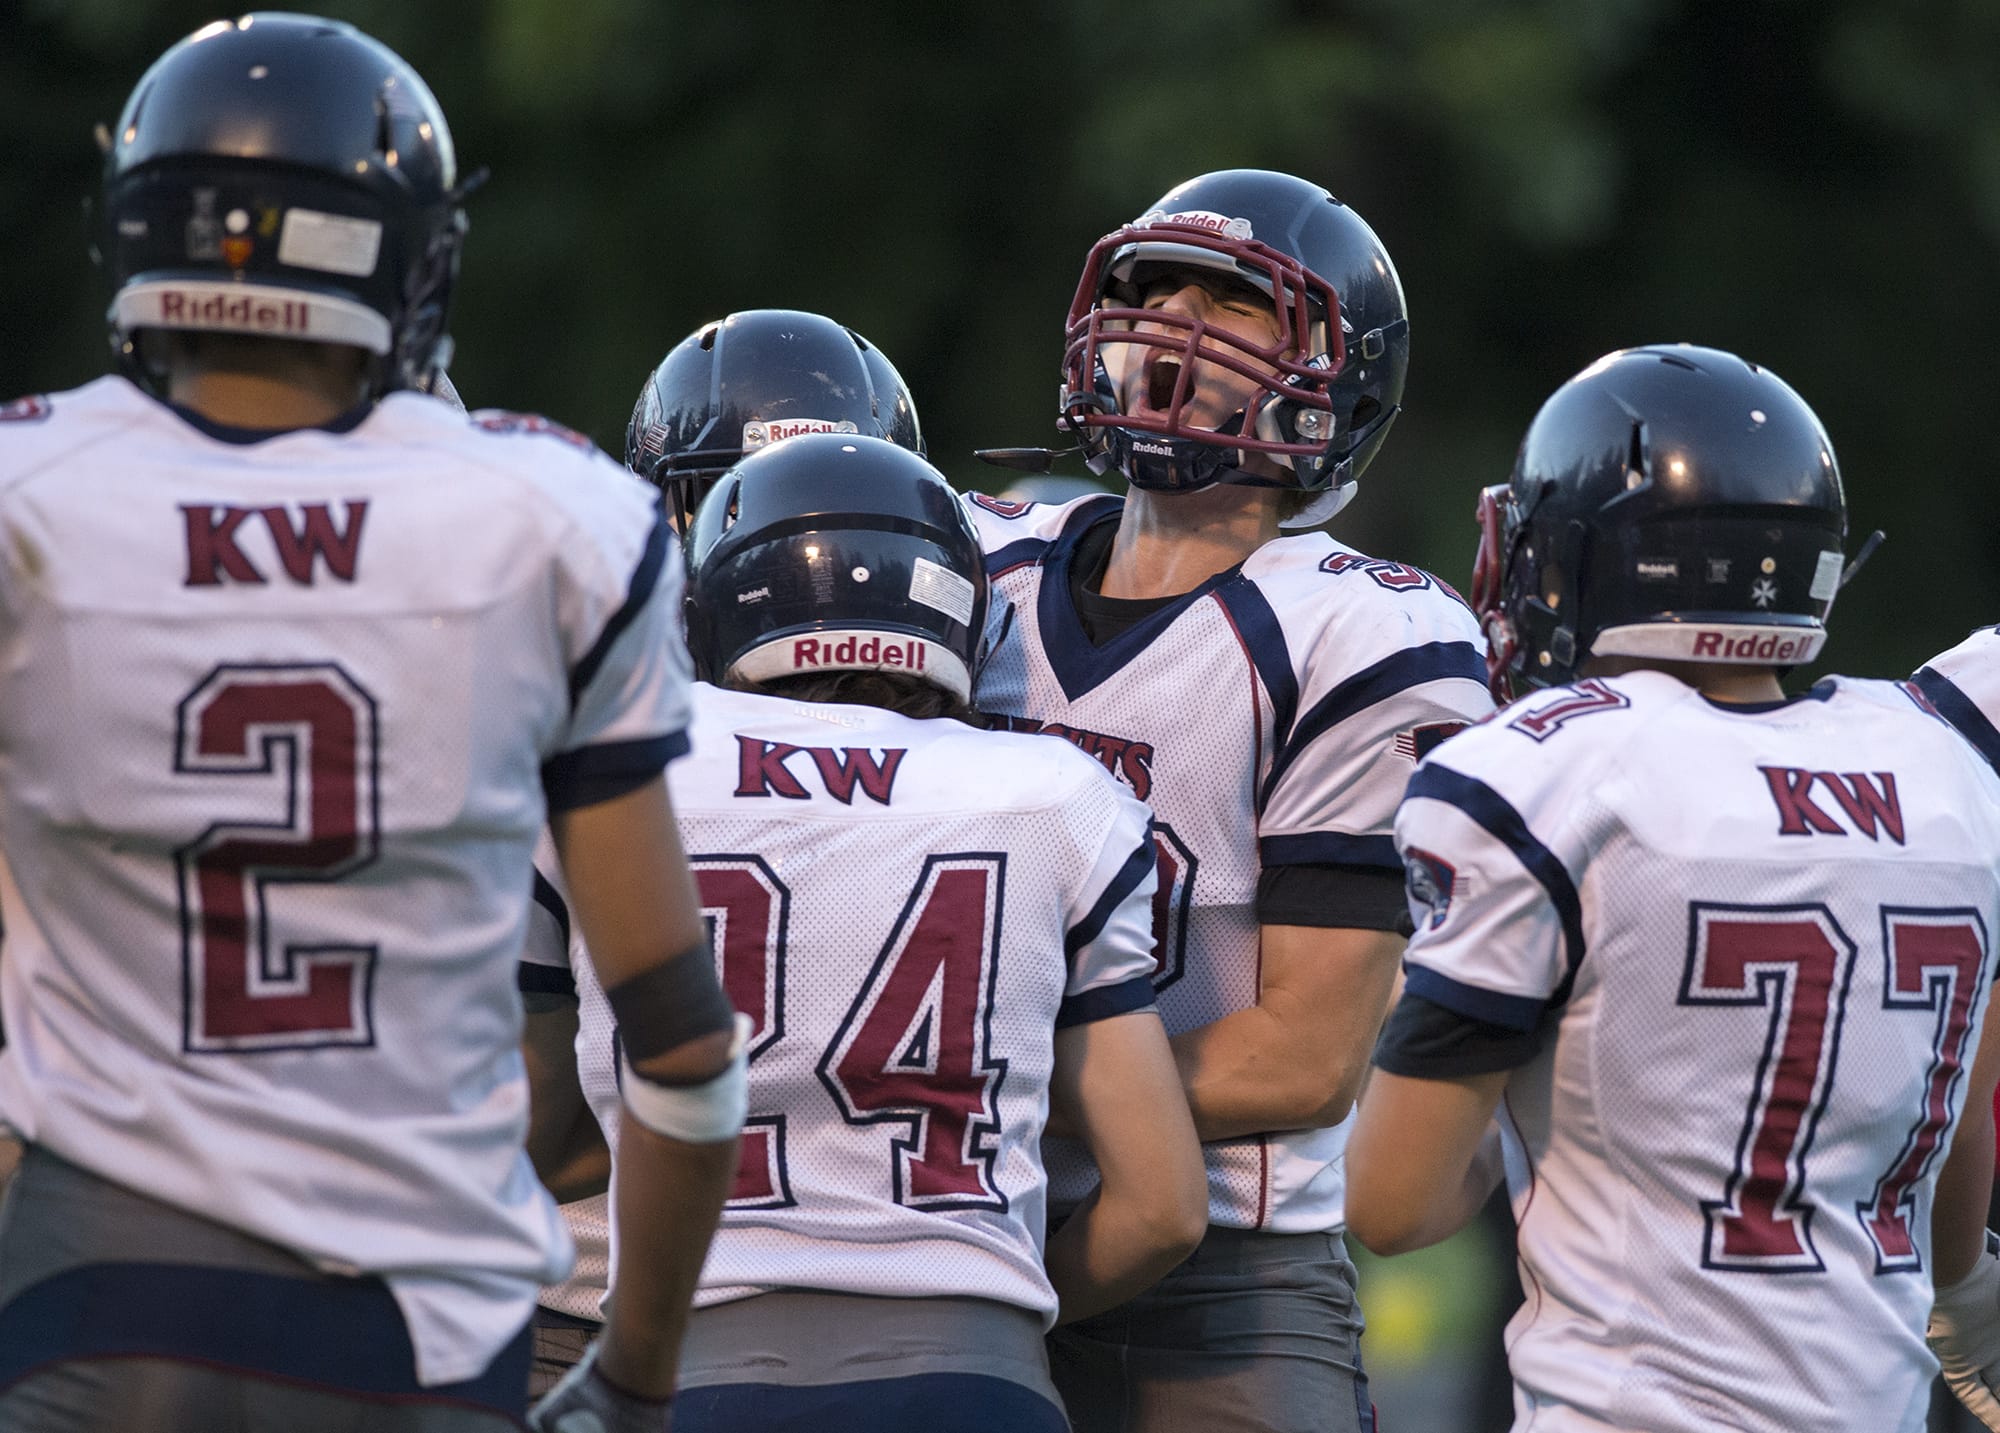 King's Way players celebrate after an interception in the first quarter at Kiggins Bowl on Thursday evening, Aug. 31, 2017.